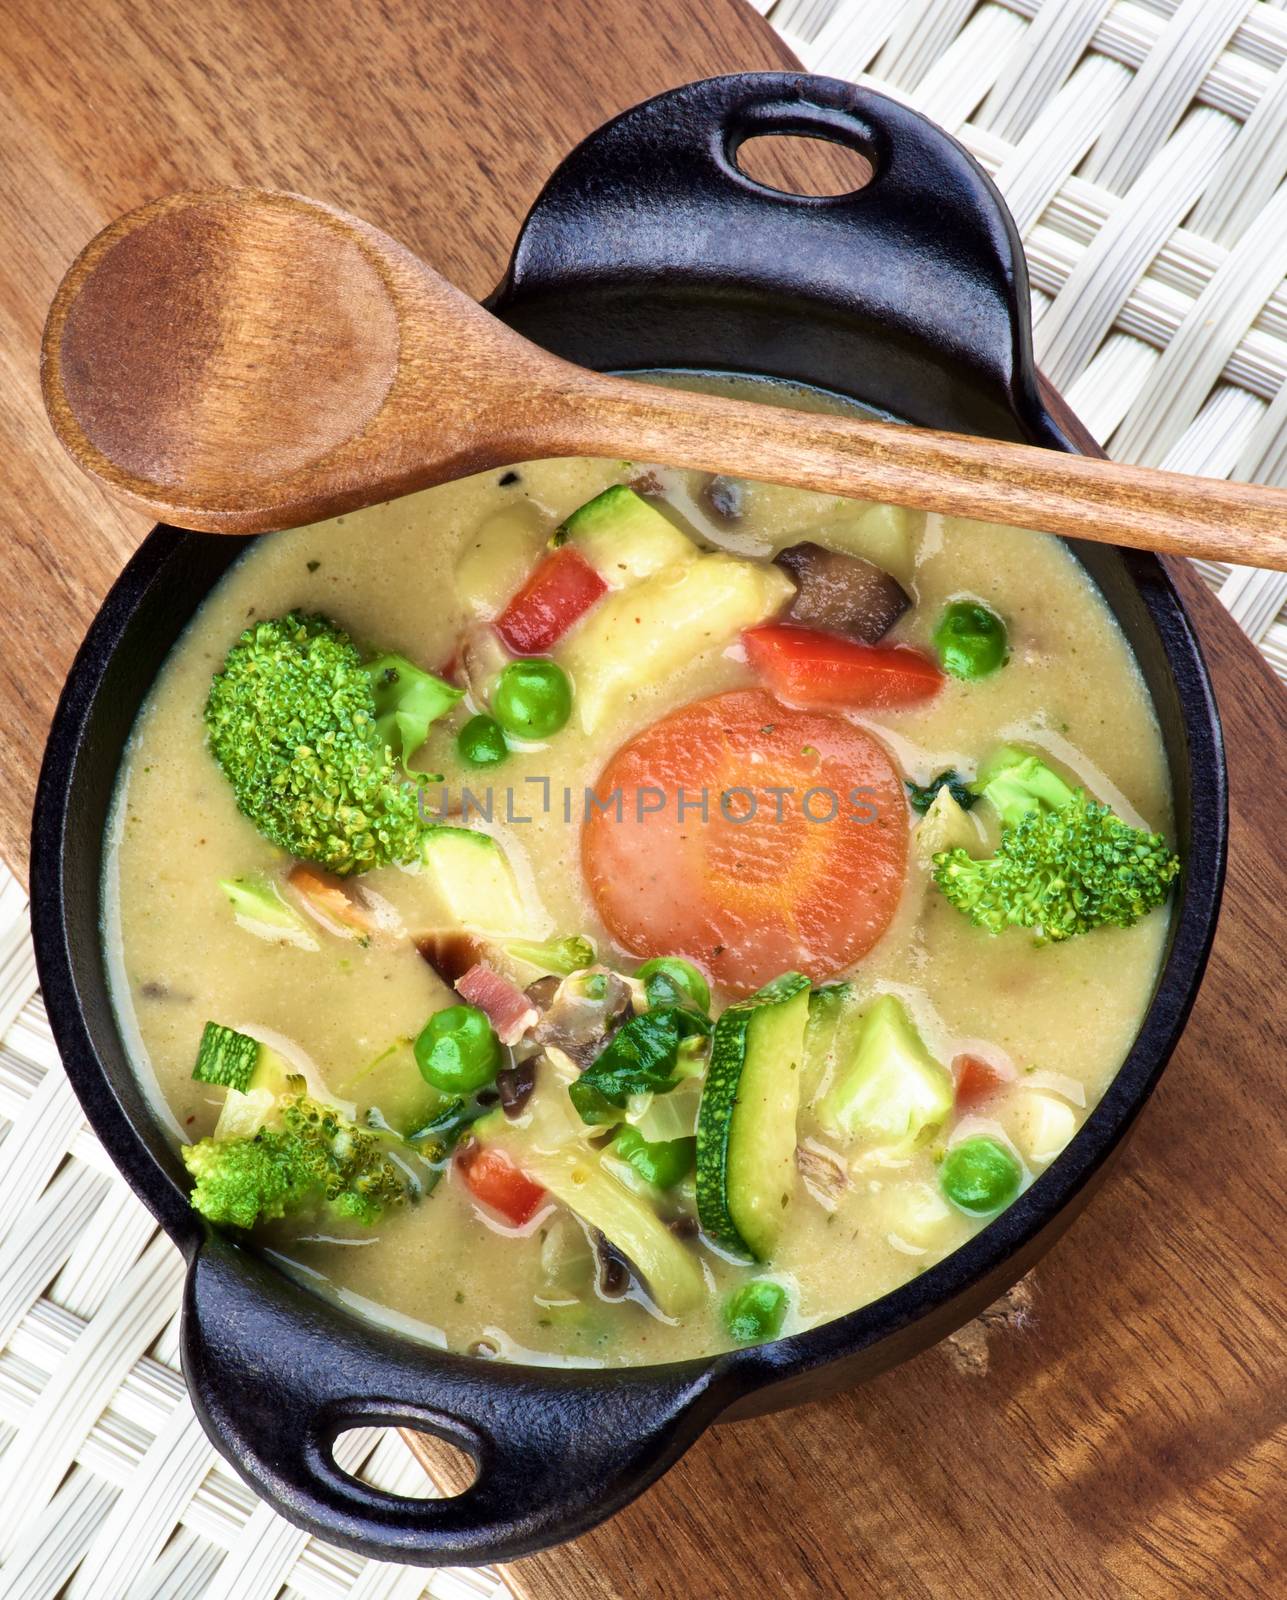 Rustic Vegetables Creamy Soup with Broccoli, Carrots, Zucchini, Leek, Red Bell Pepper and Green Pea in Black Iron Stewpot with Wooden Spoon closeup on Wooden Cutting Board. Top View